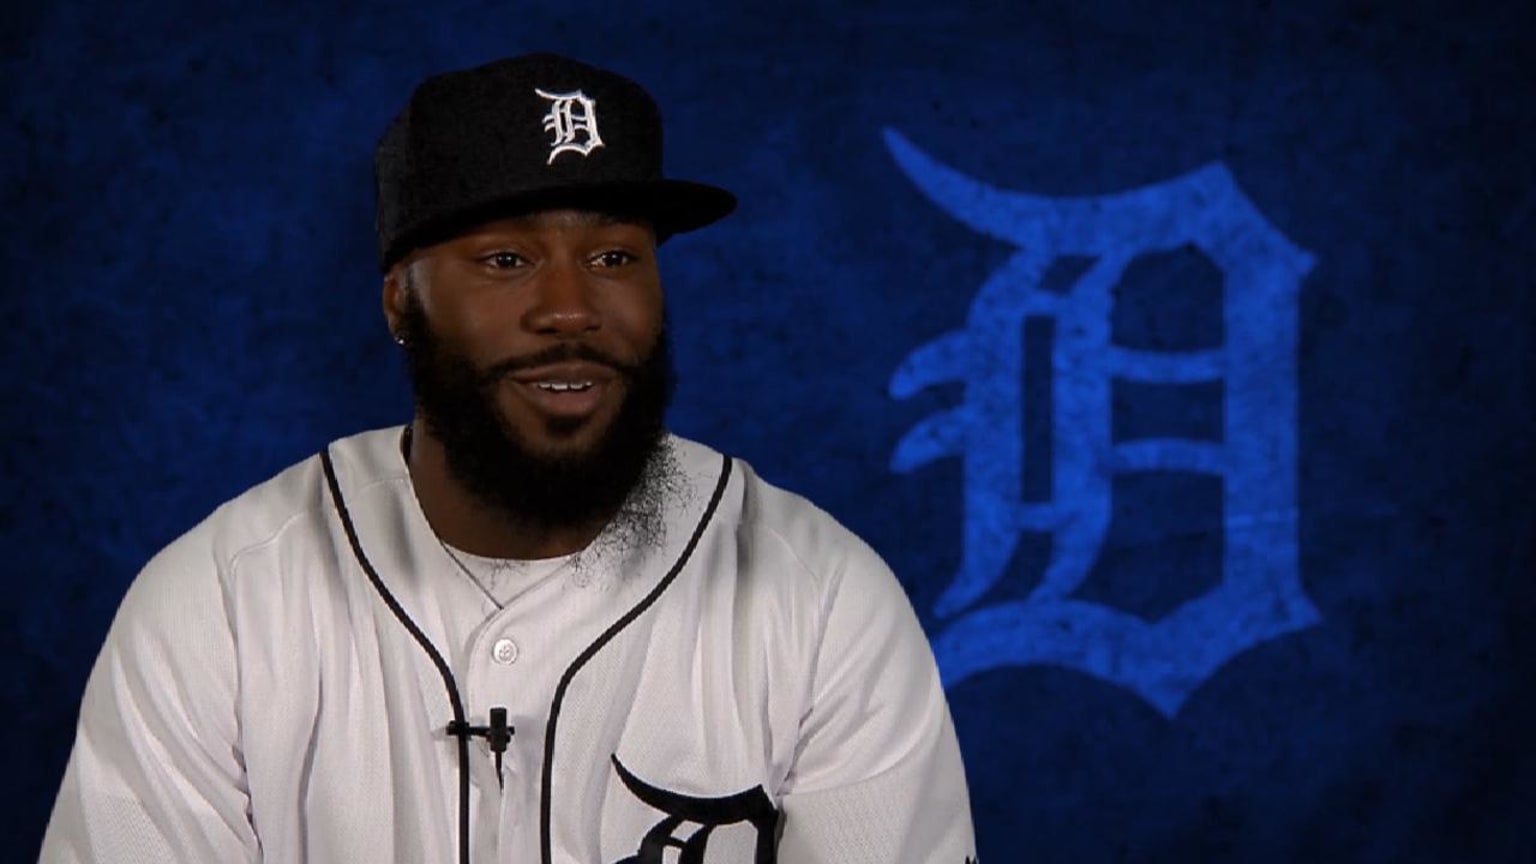 A good get': More than just a player, Detroit Tigers see Josh Harrison as  leader, teacher